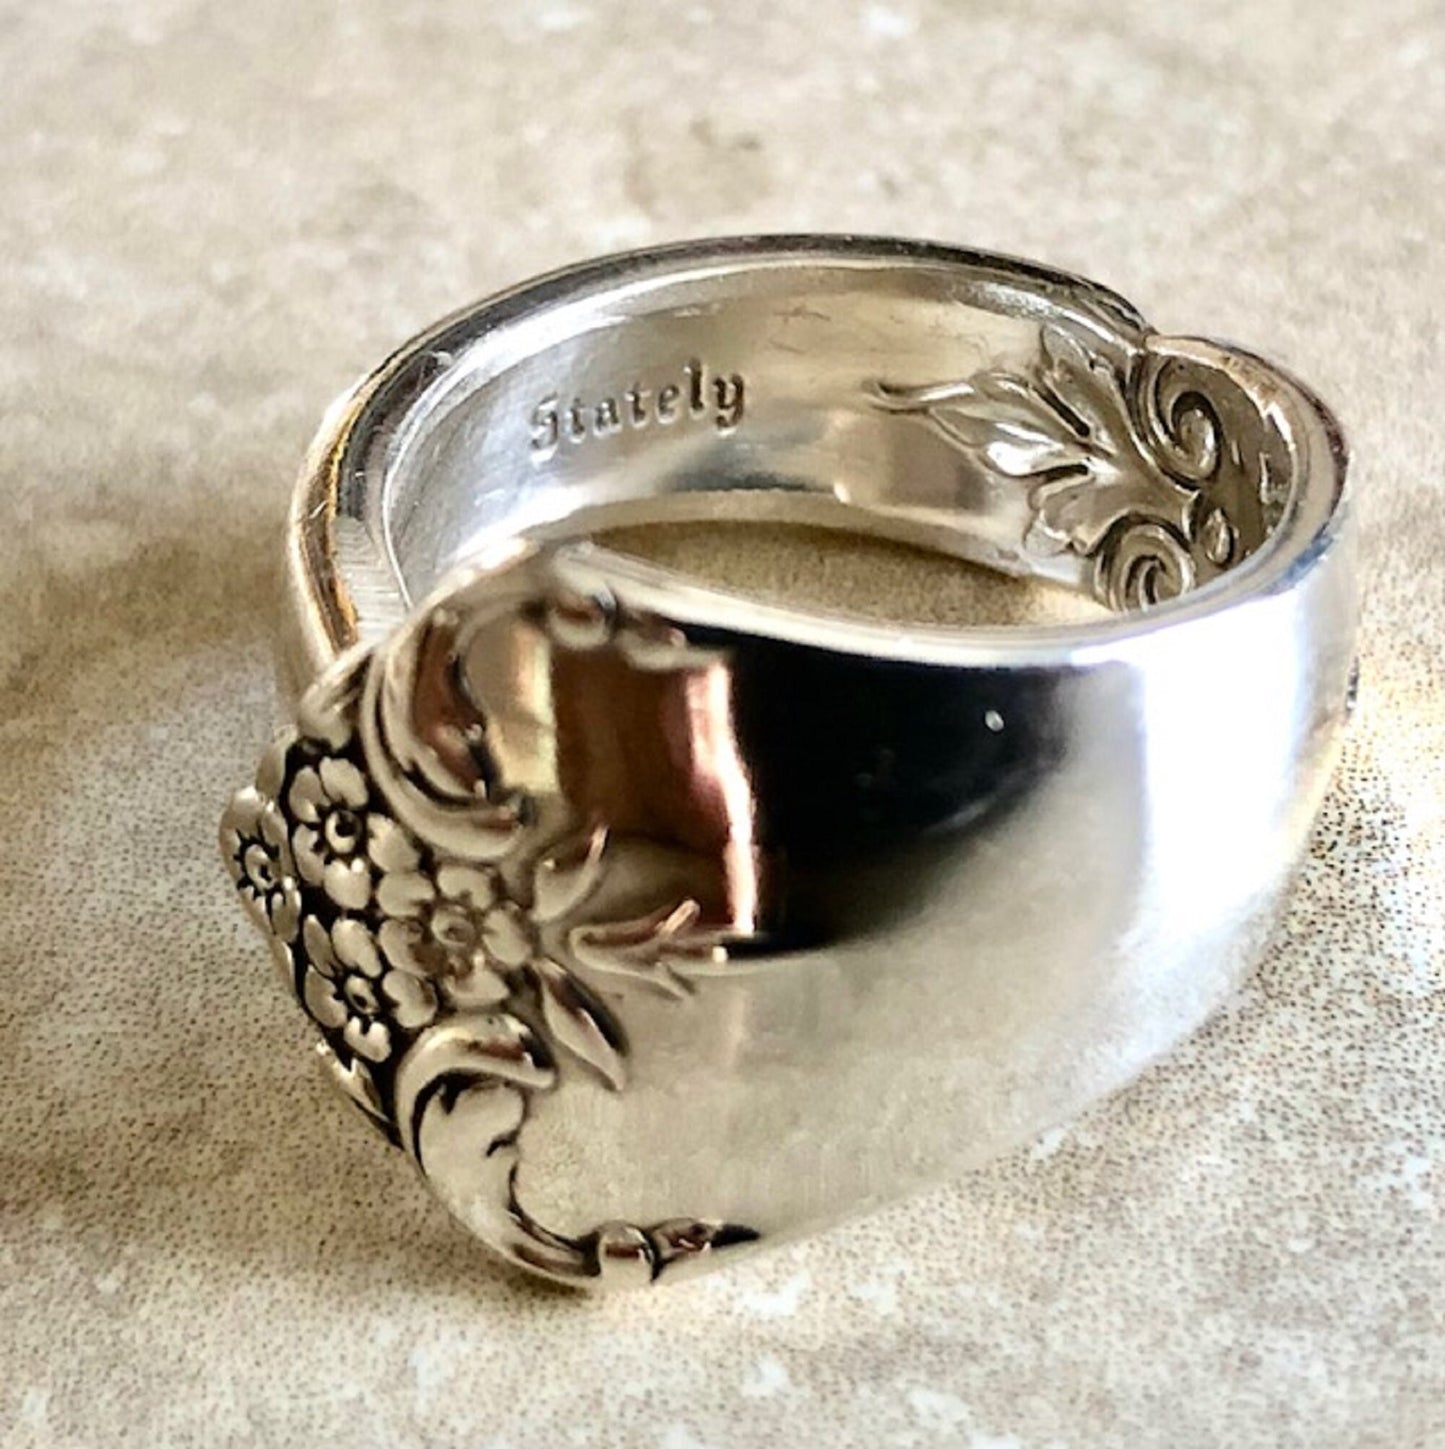 Antique Daffodil Victorian Era 925 Sterling Silver Baker-Manchester Spoon Ring 19th Century, Vintage Jewelry, Truth, Honesty, Handmade